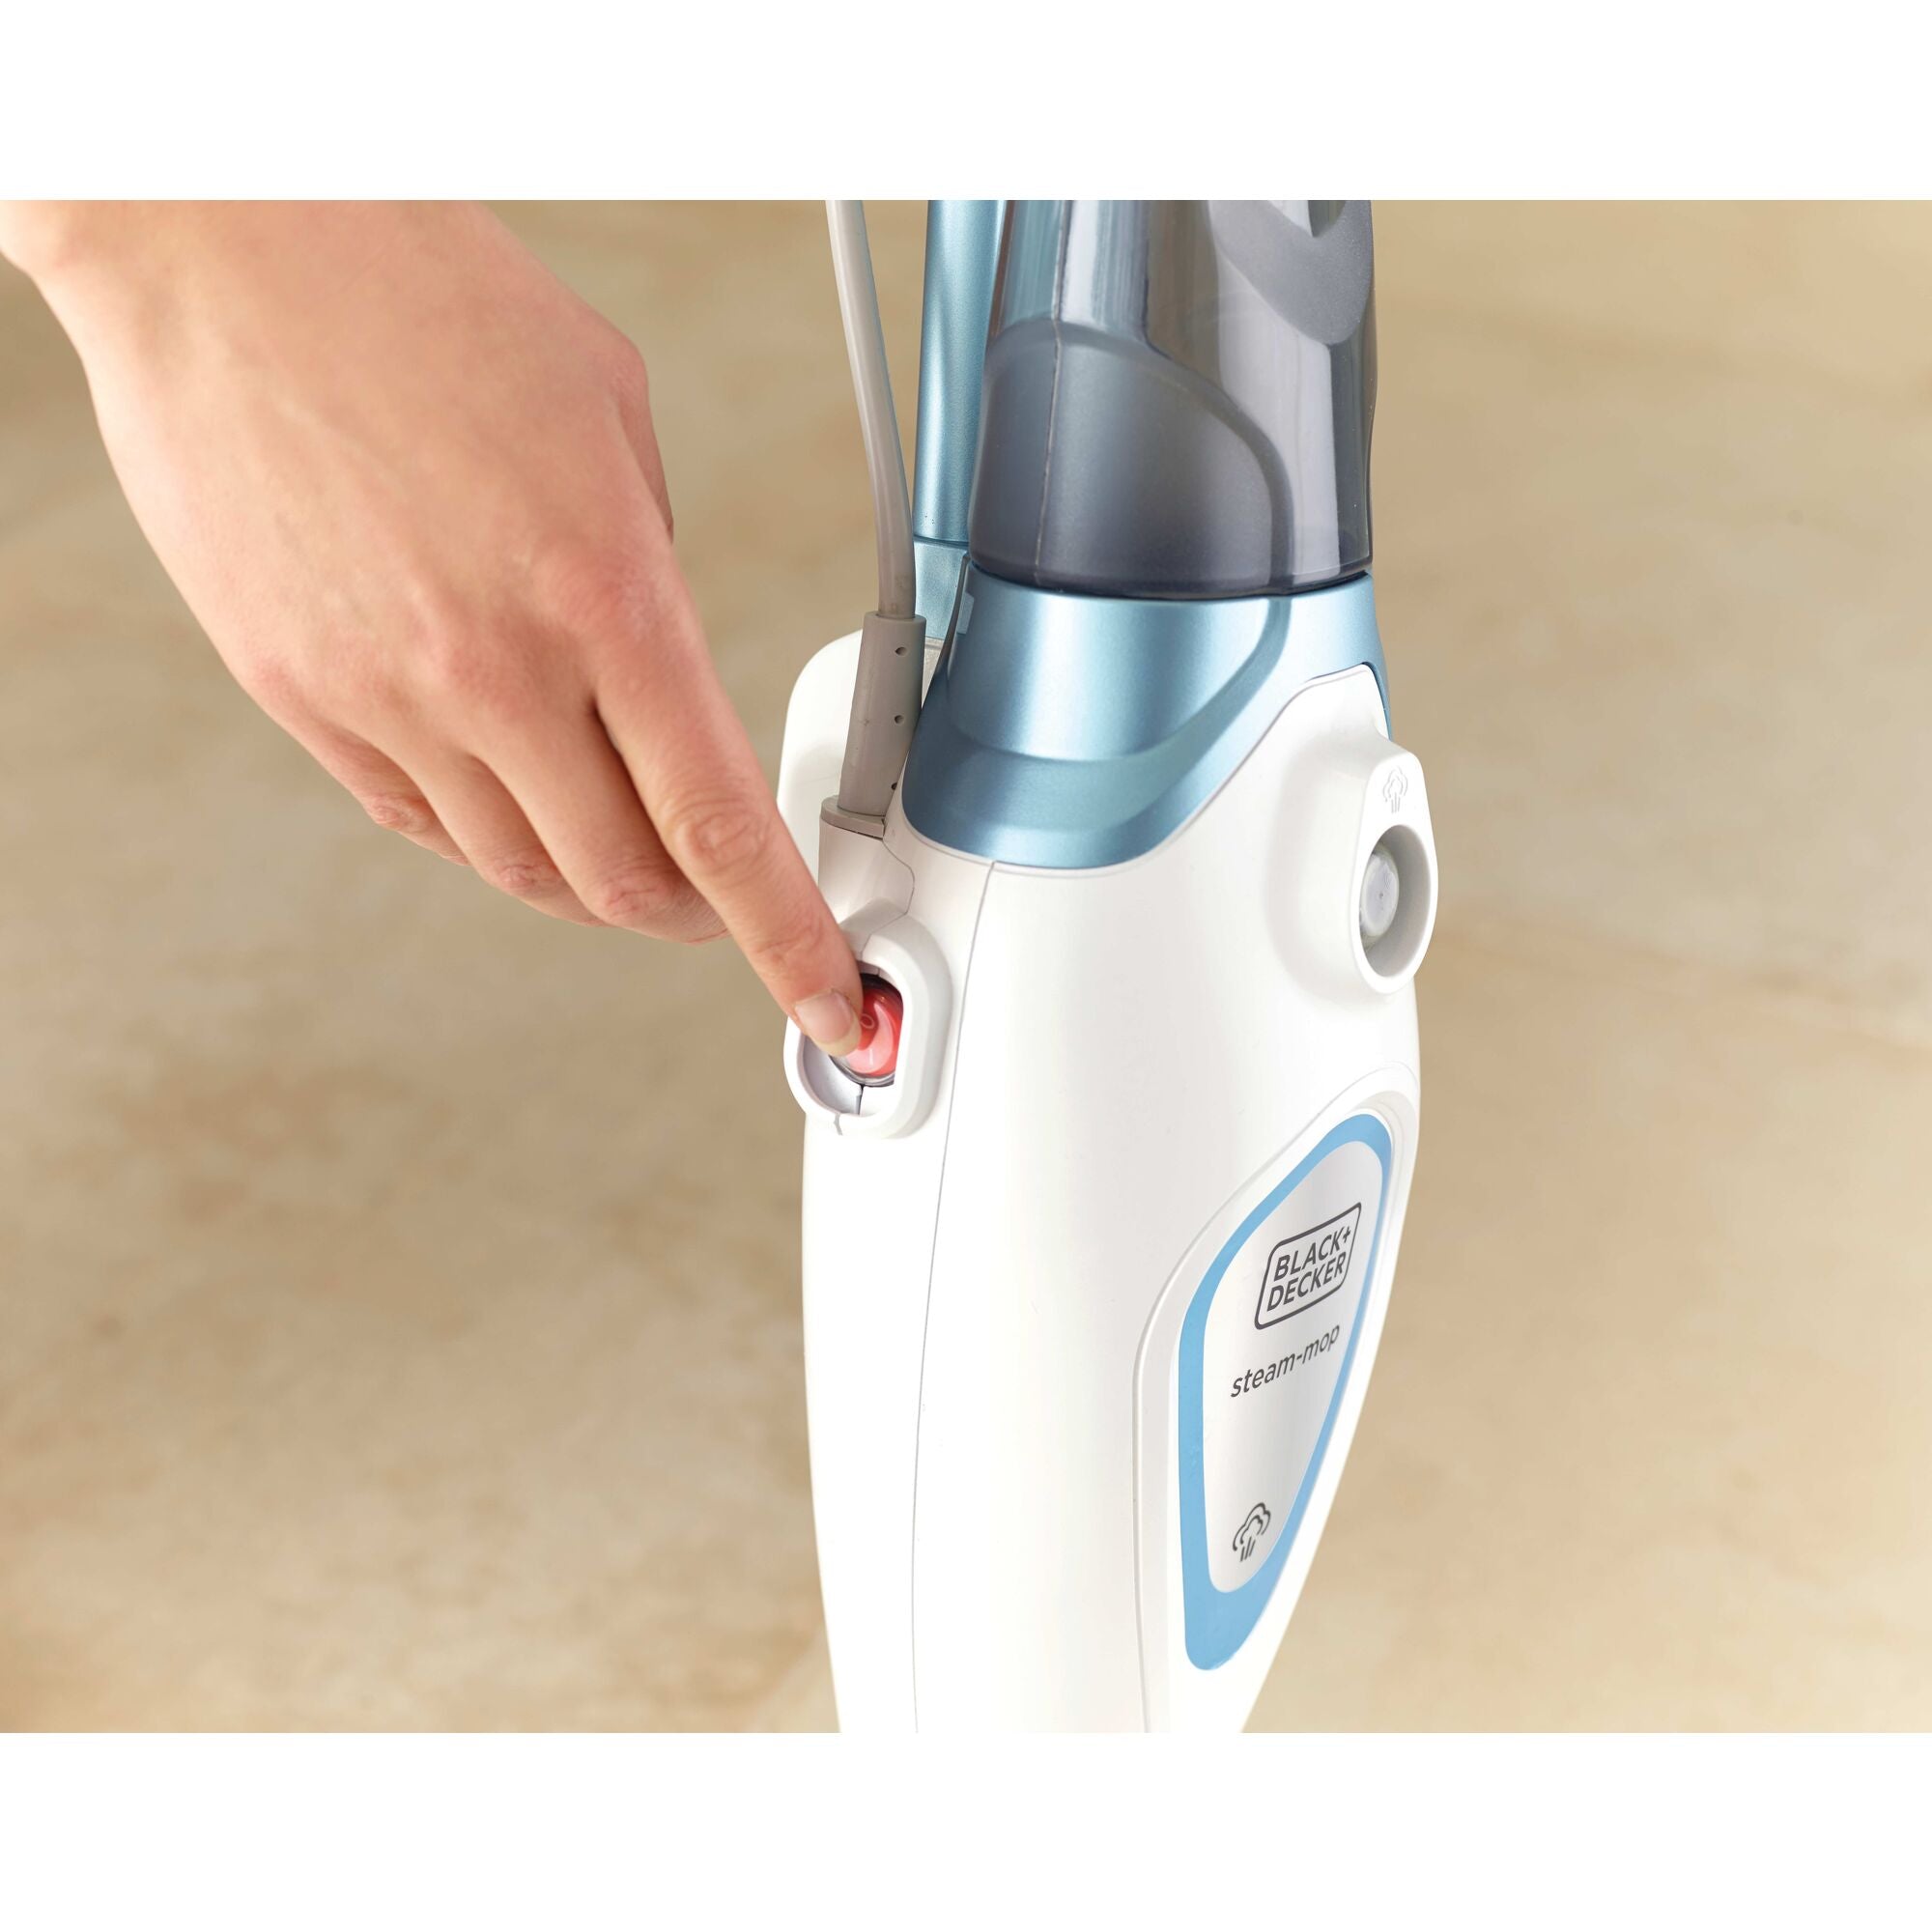 Easy operate feature of Steam-Mop with Lift + Reach Head.